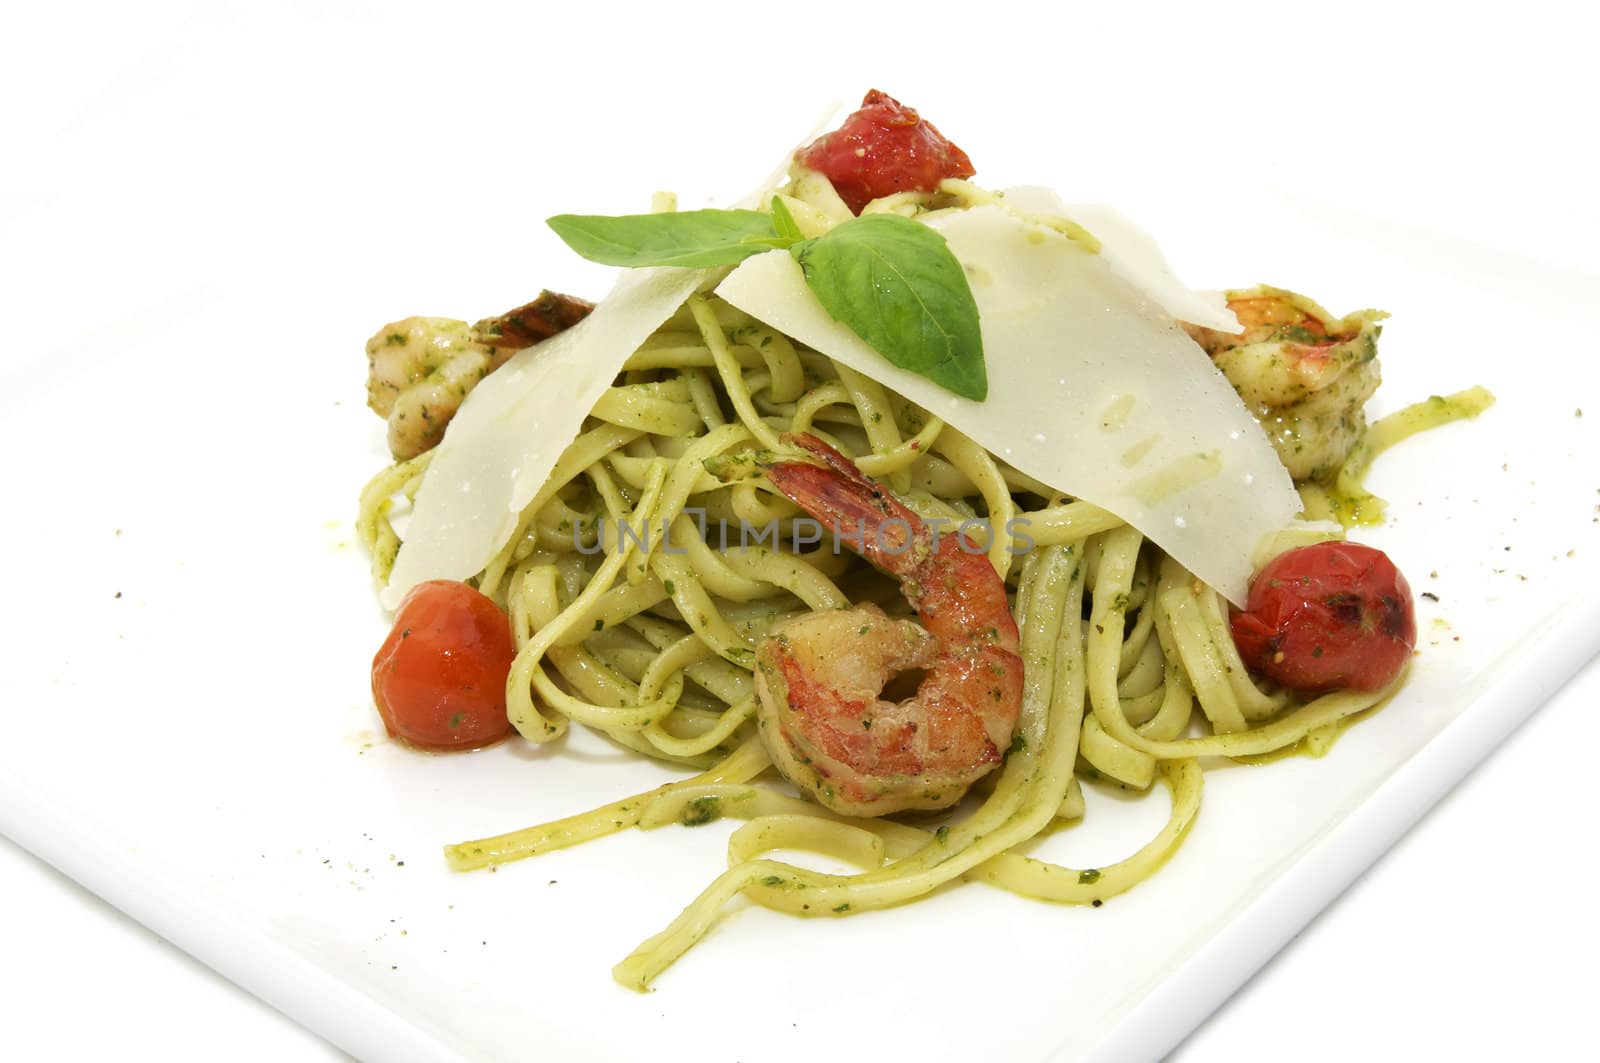 Spaghetti with prawns and cherry tomatoes on the cheese plate